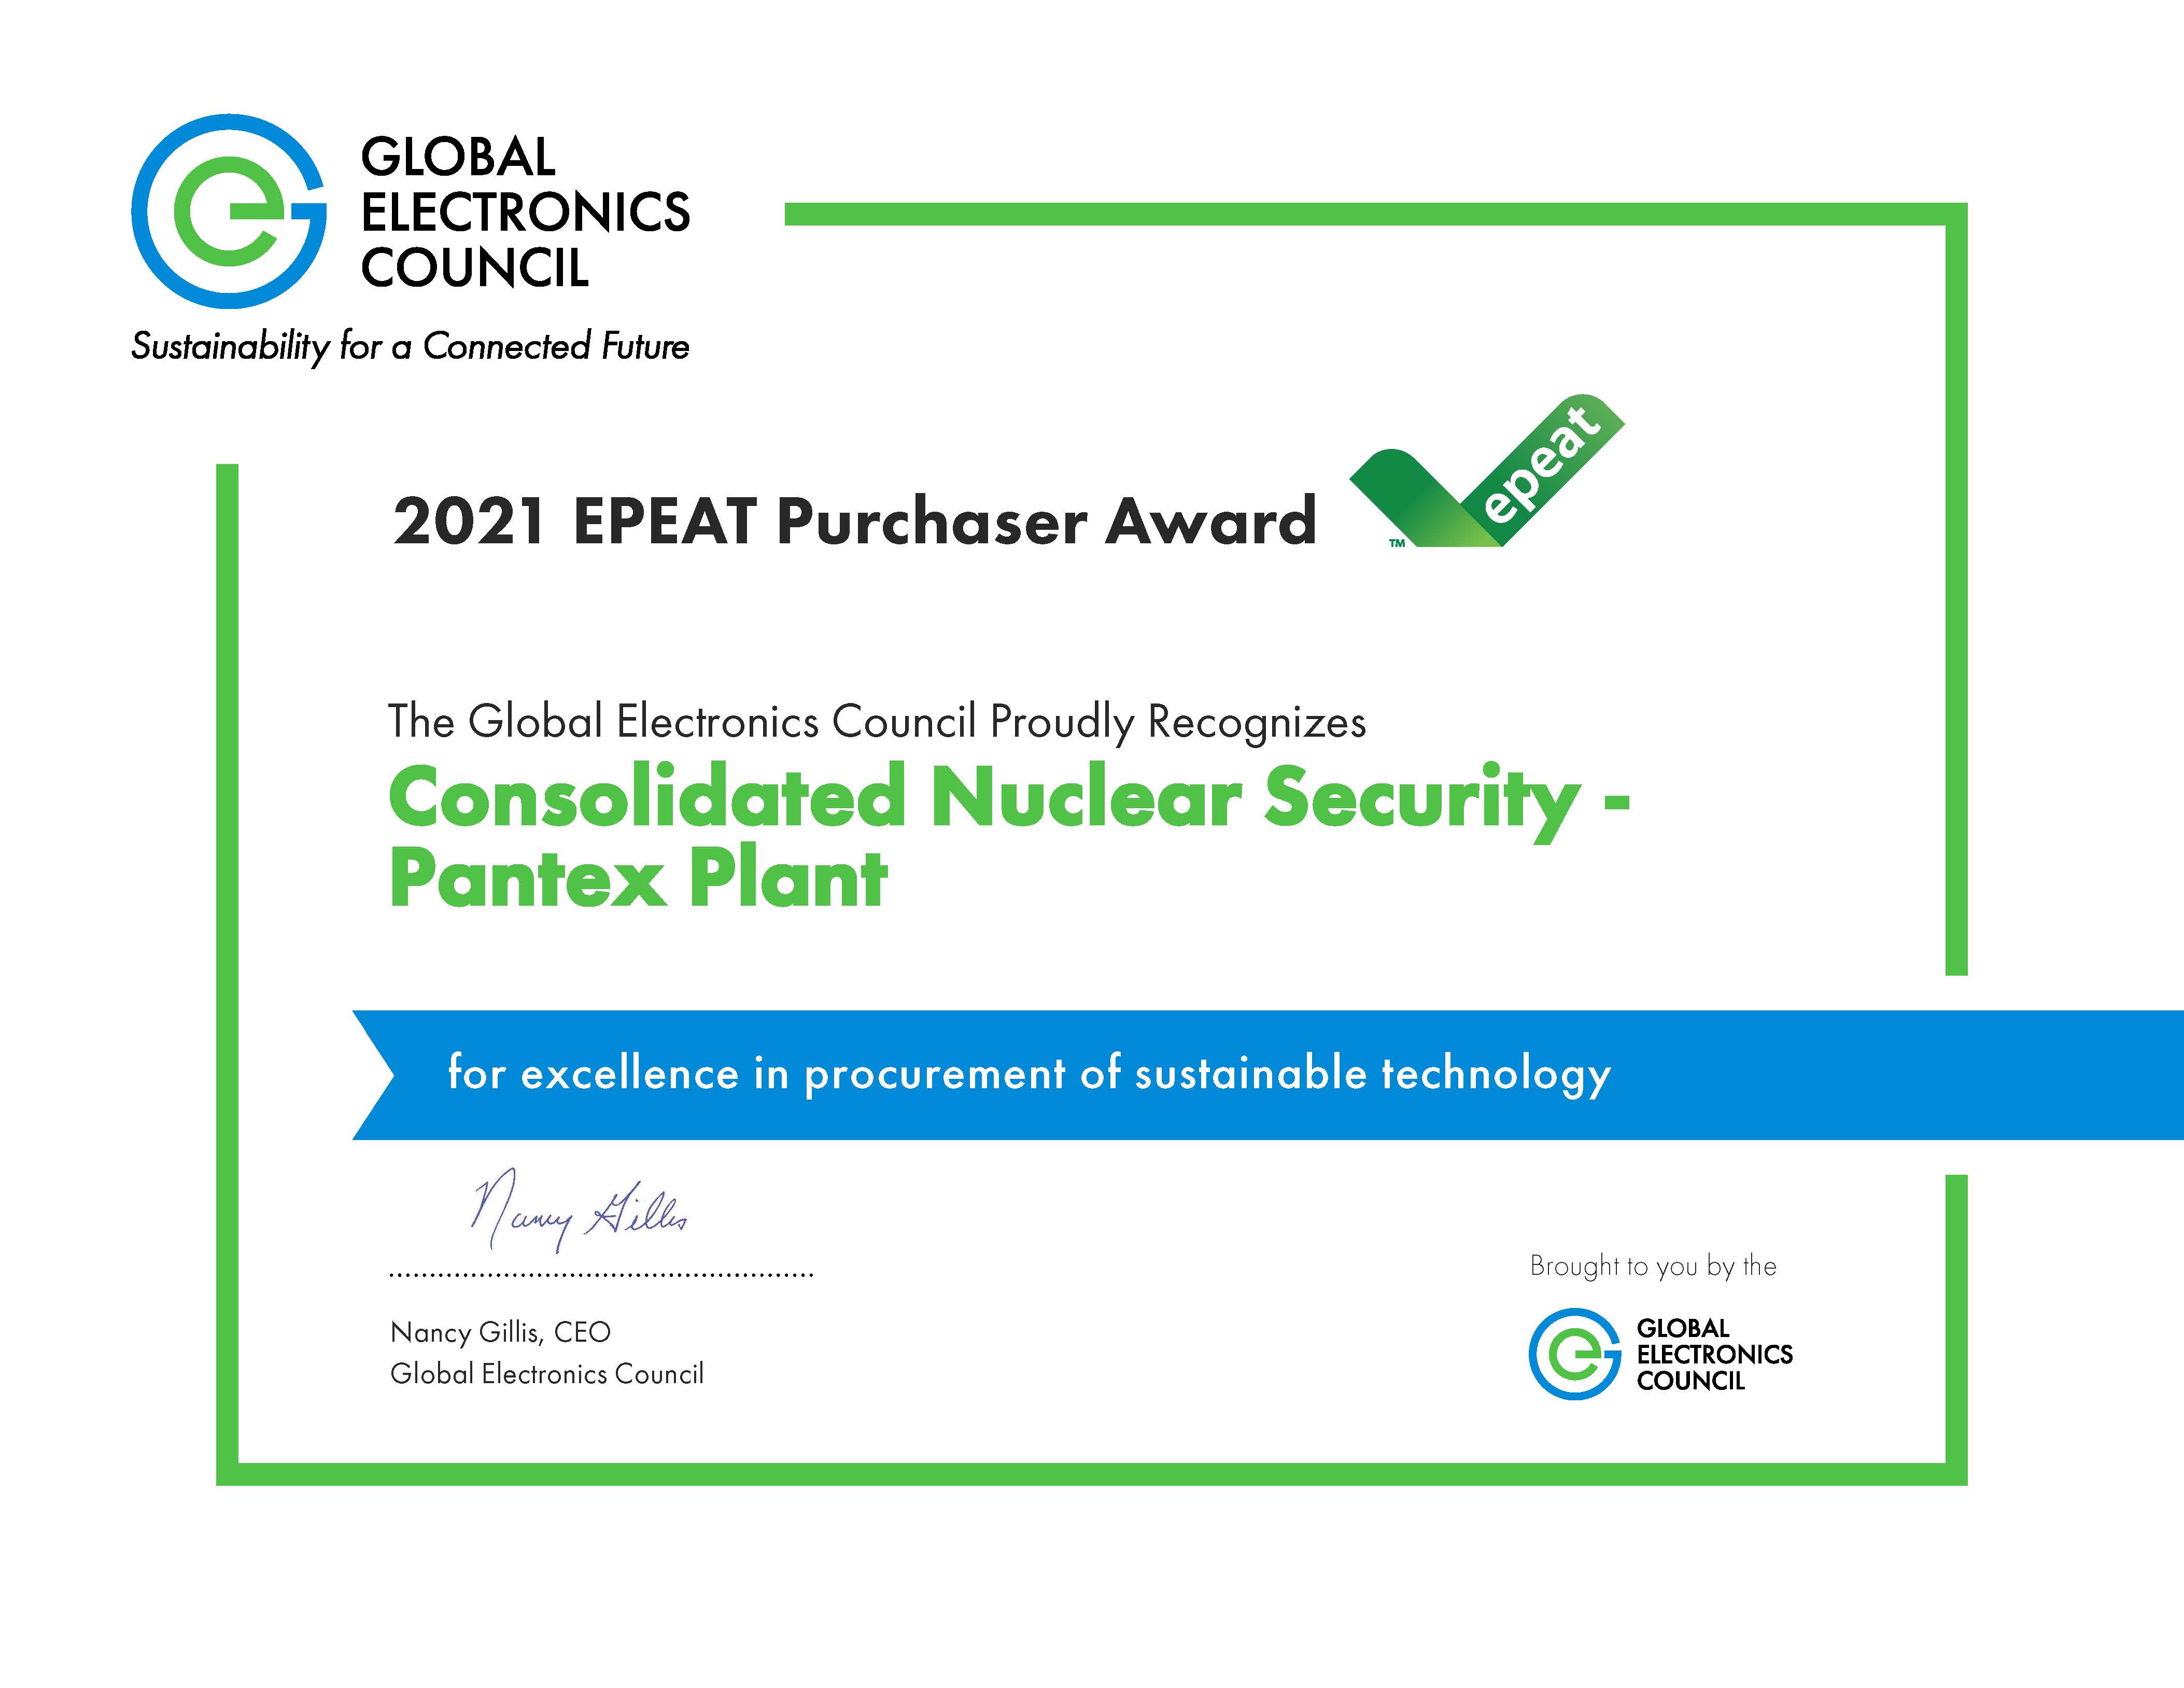 2021 EPEAT Purchaser Award